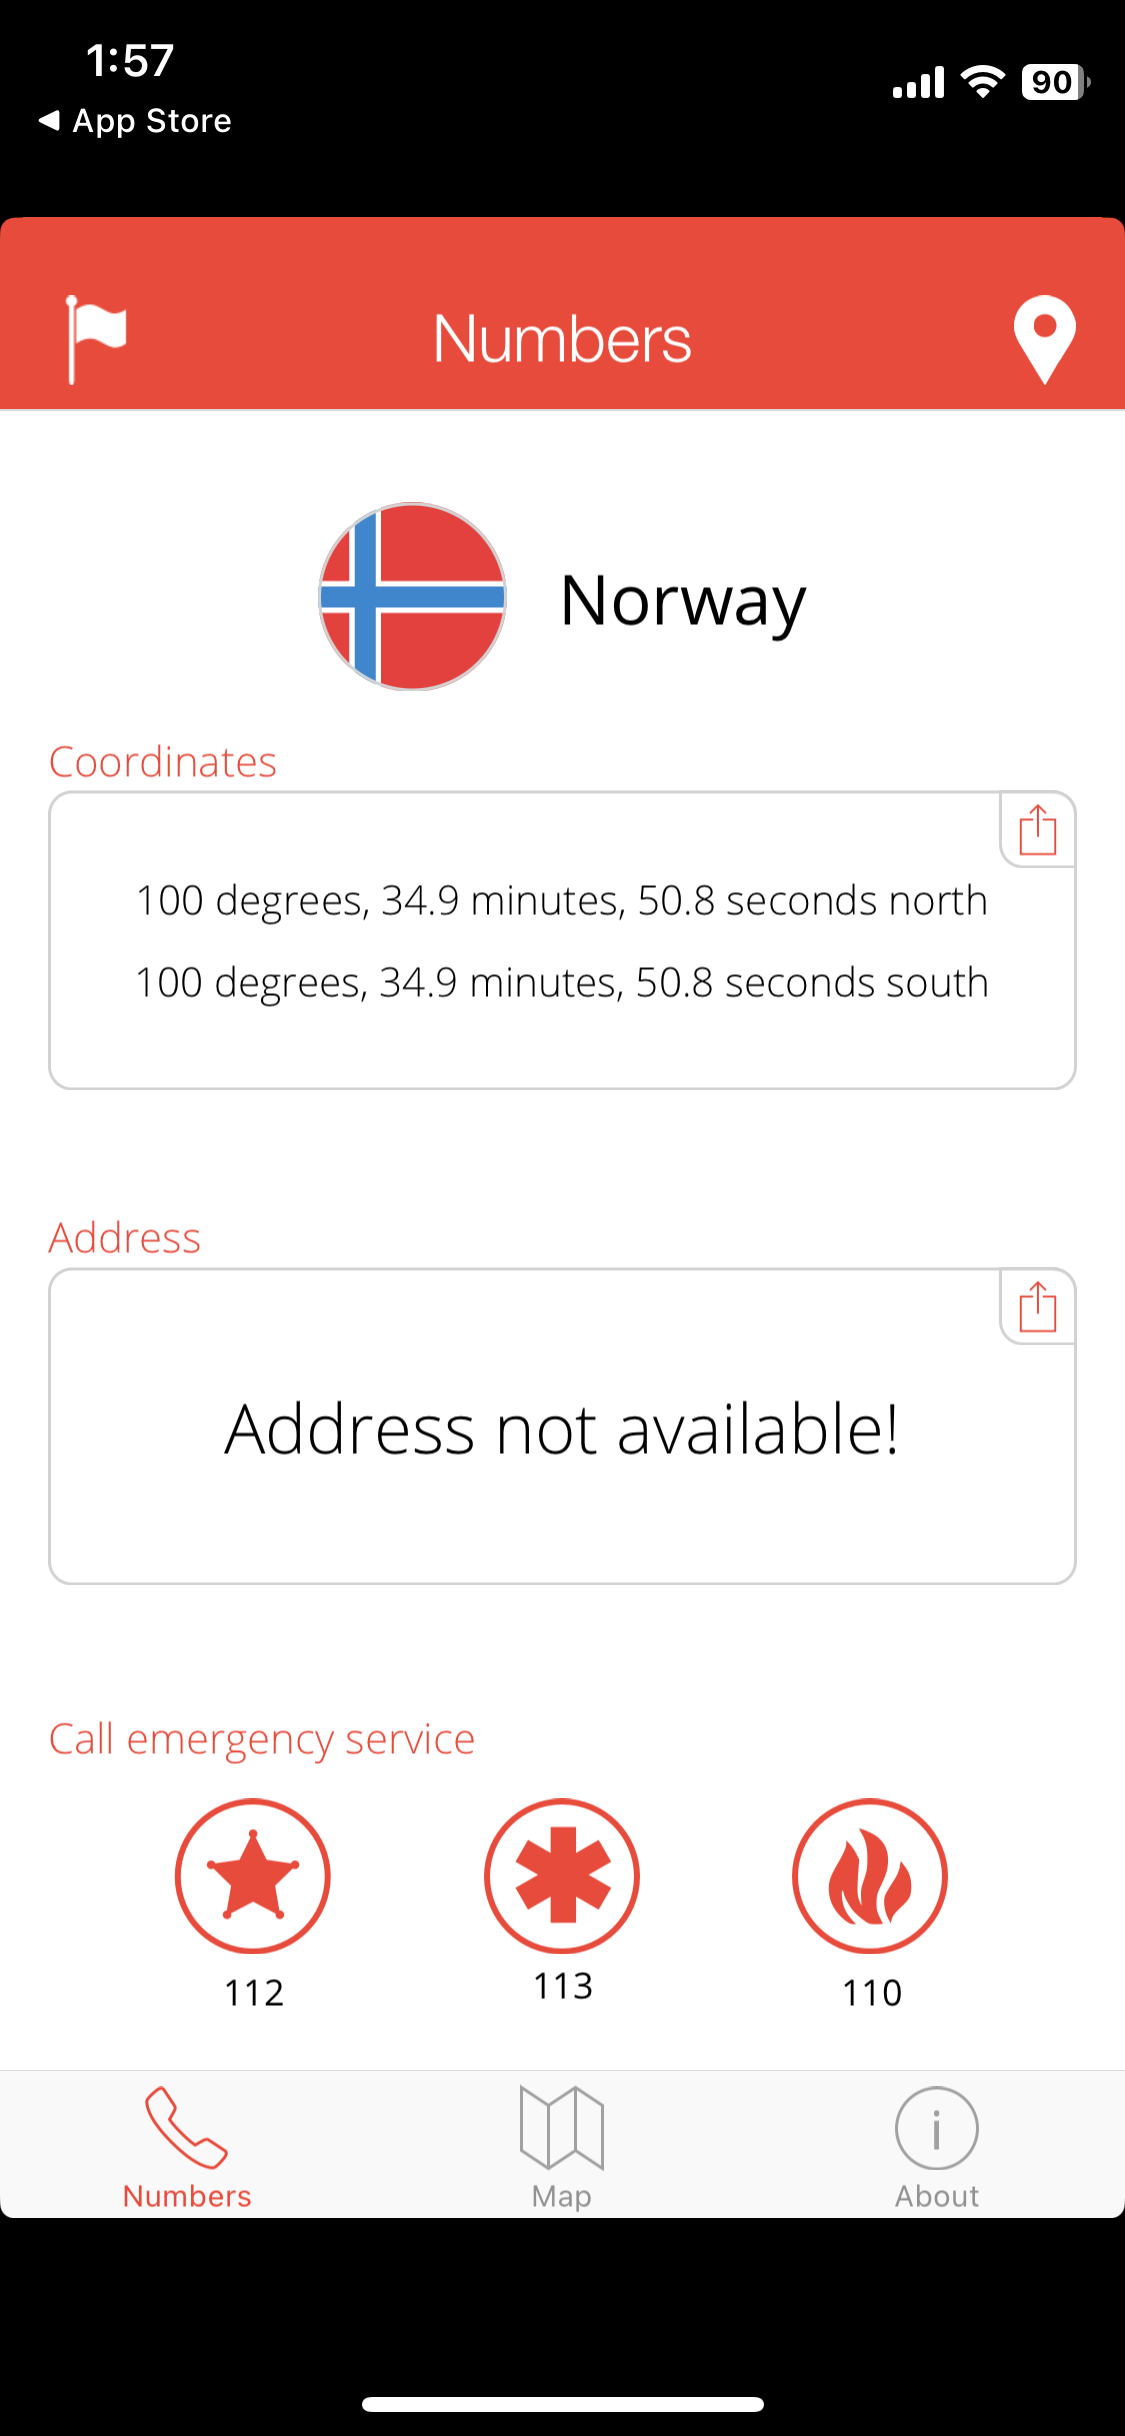 Screenshot of TripWhistle app screen showing information for Norway.